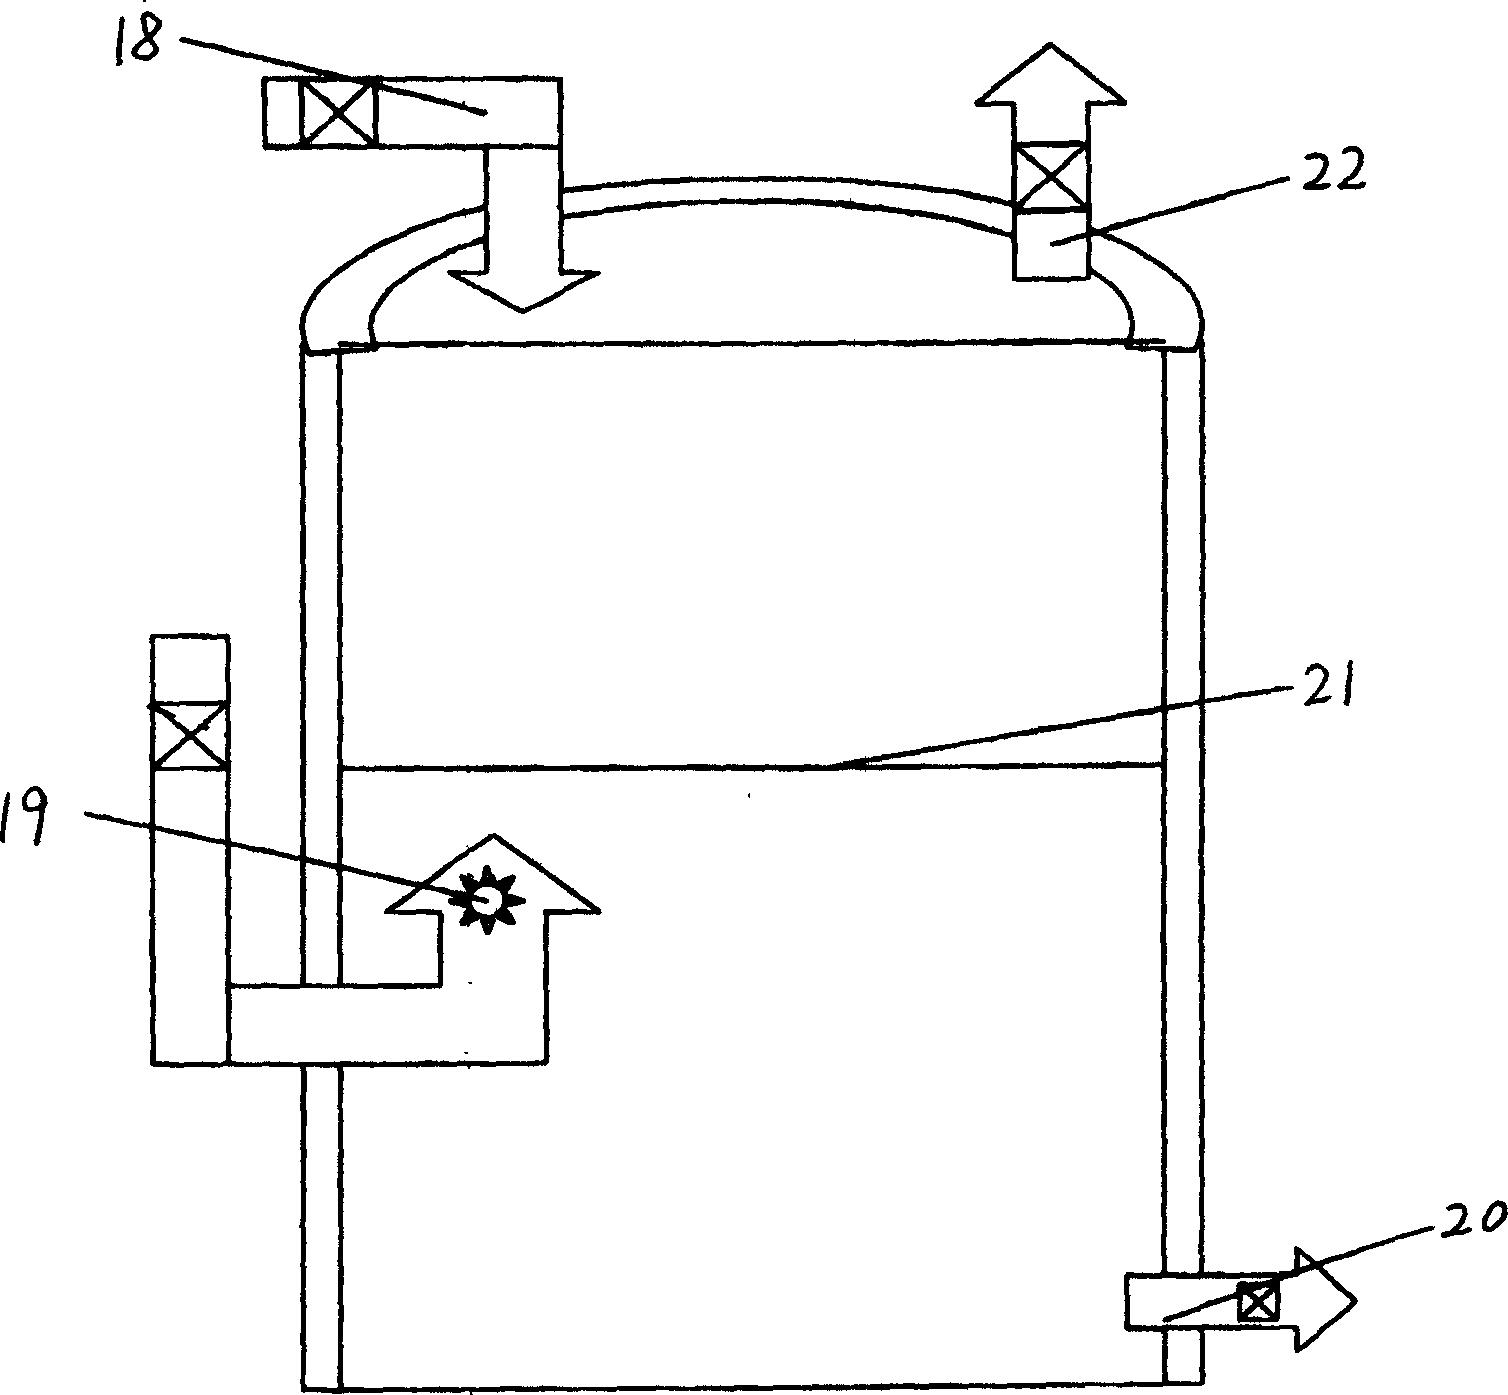 Method for producing liquefied gas from plant stalks